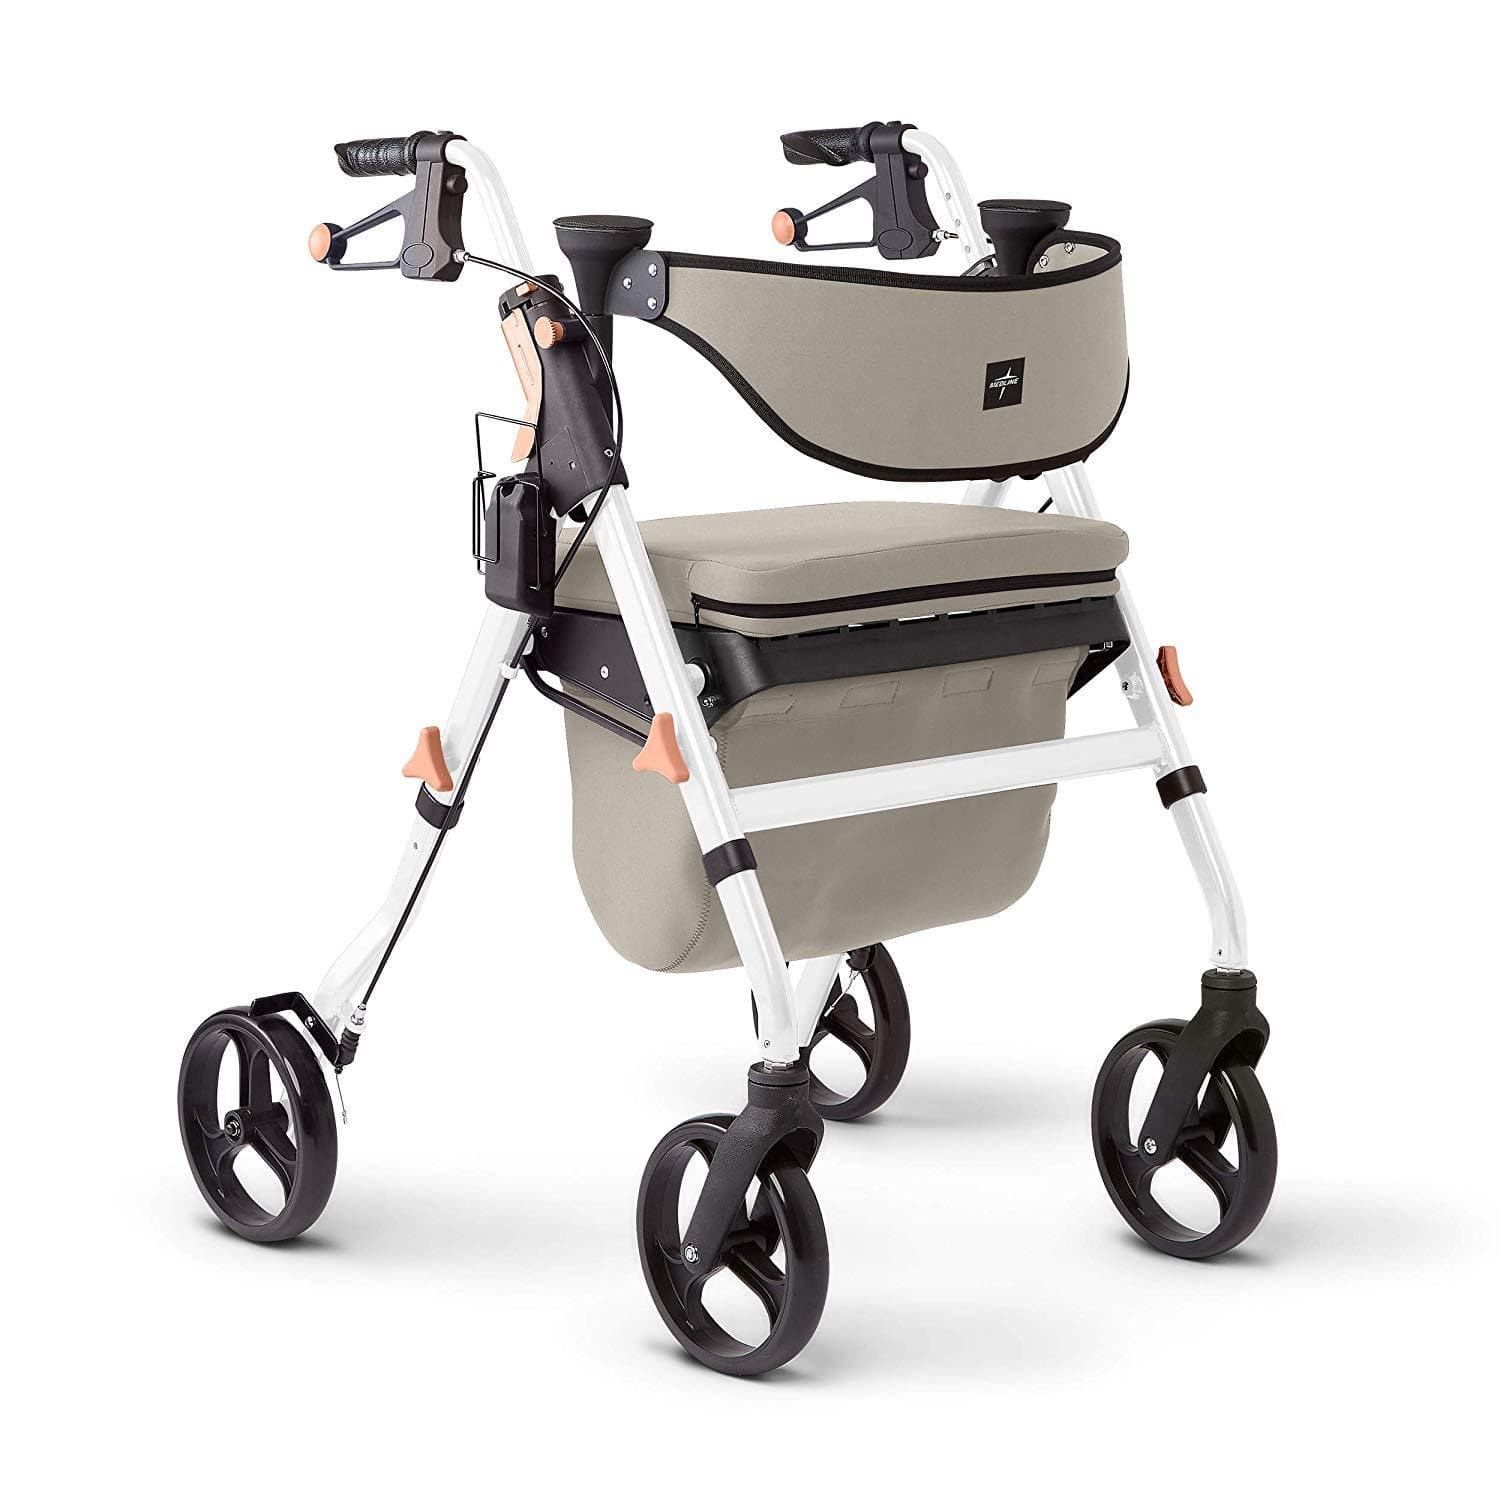 Medline Premium Empower Rollator Walker with Microban Antimicrobial Protection, Seat, Comfort Handles and Thick Backrest - Senior.com Rollators